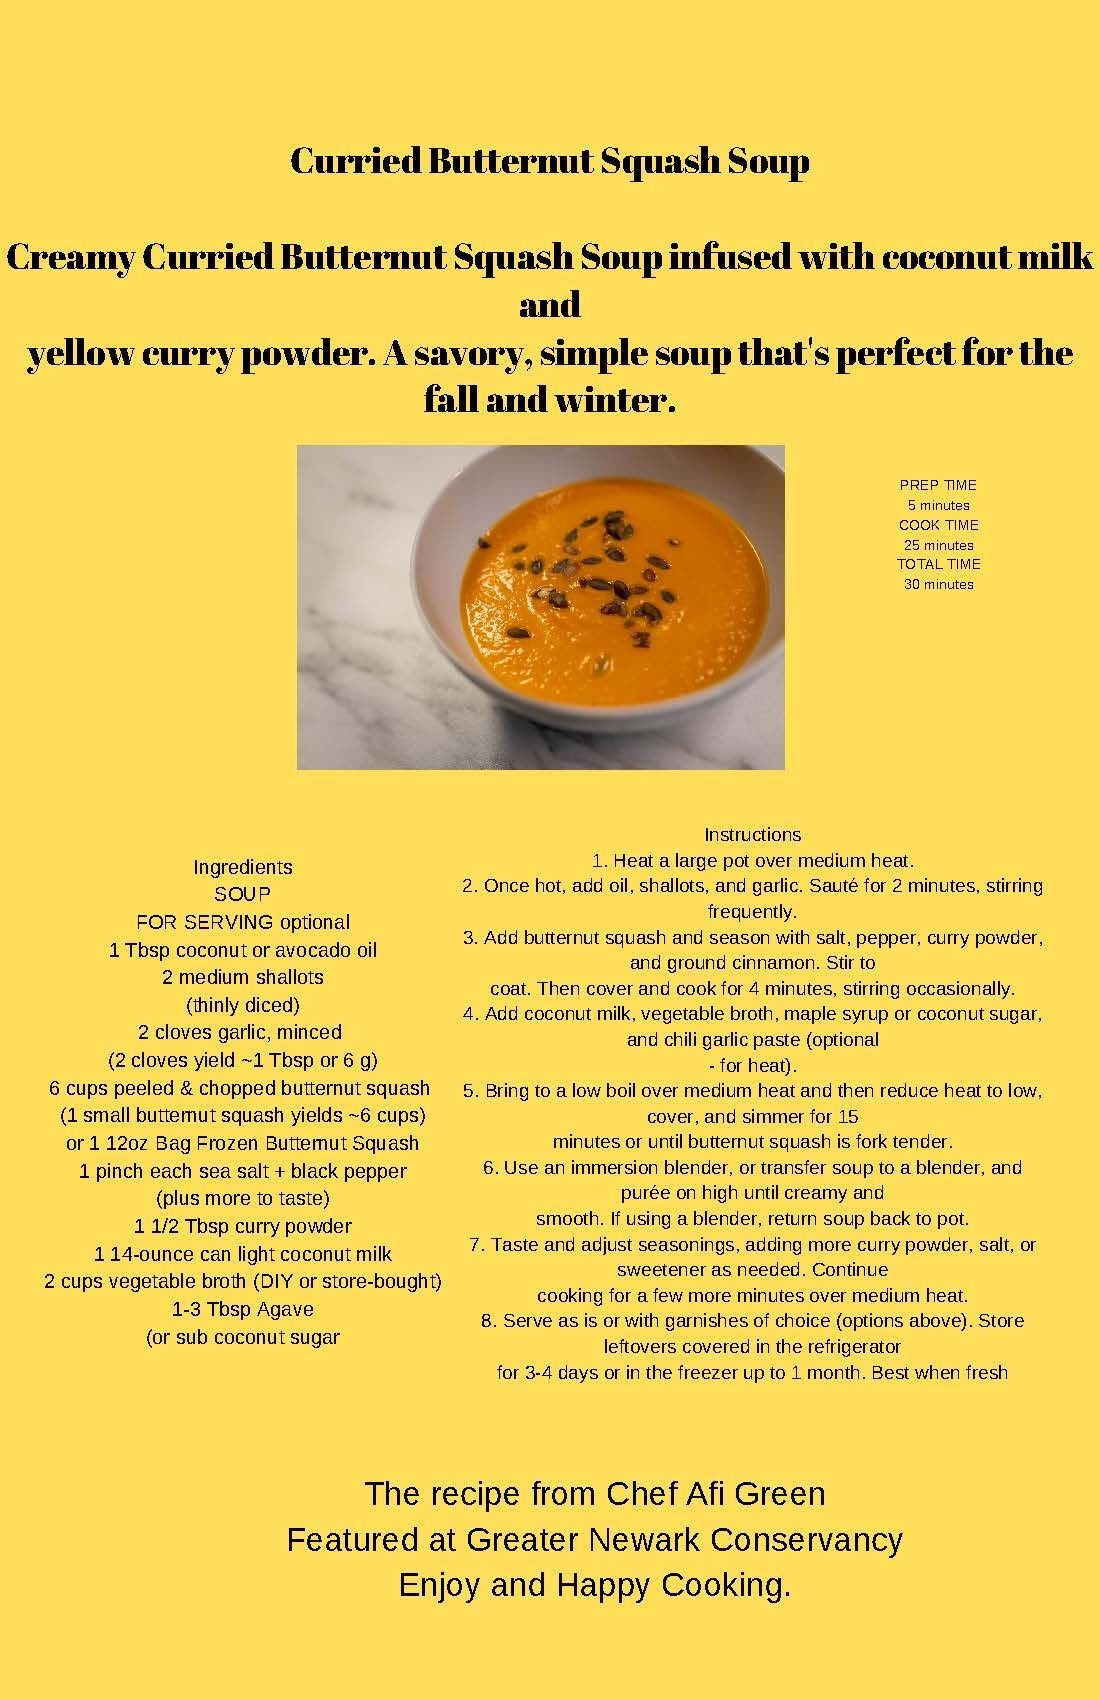 Family Fun in the Kitchen: Curried Butternut Squash Soup